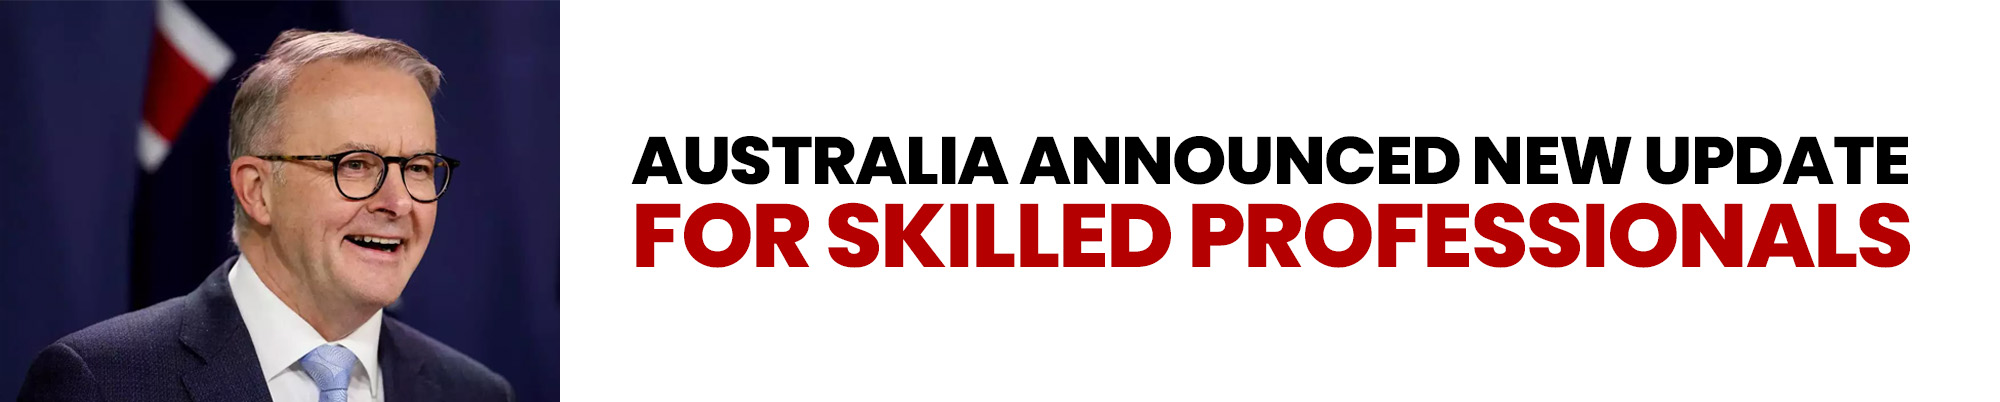 australia-announced-new-update-for-skilled-professionals